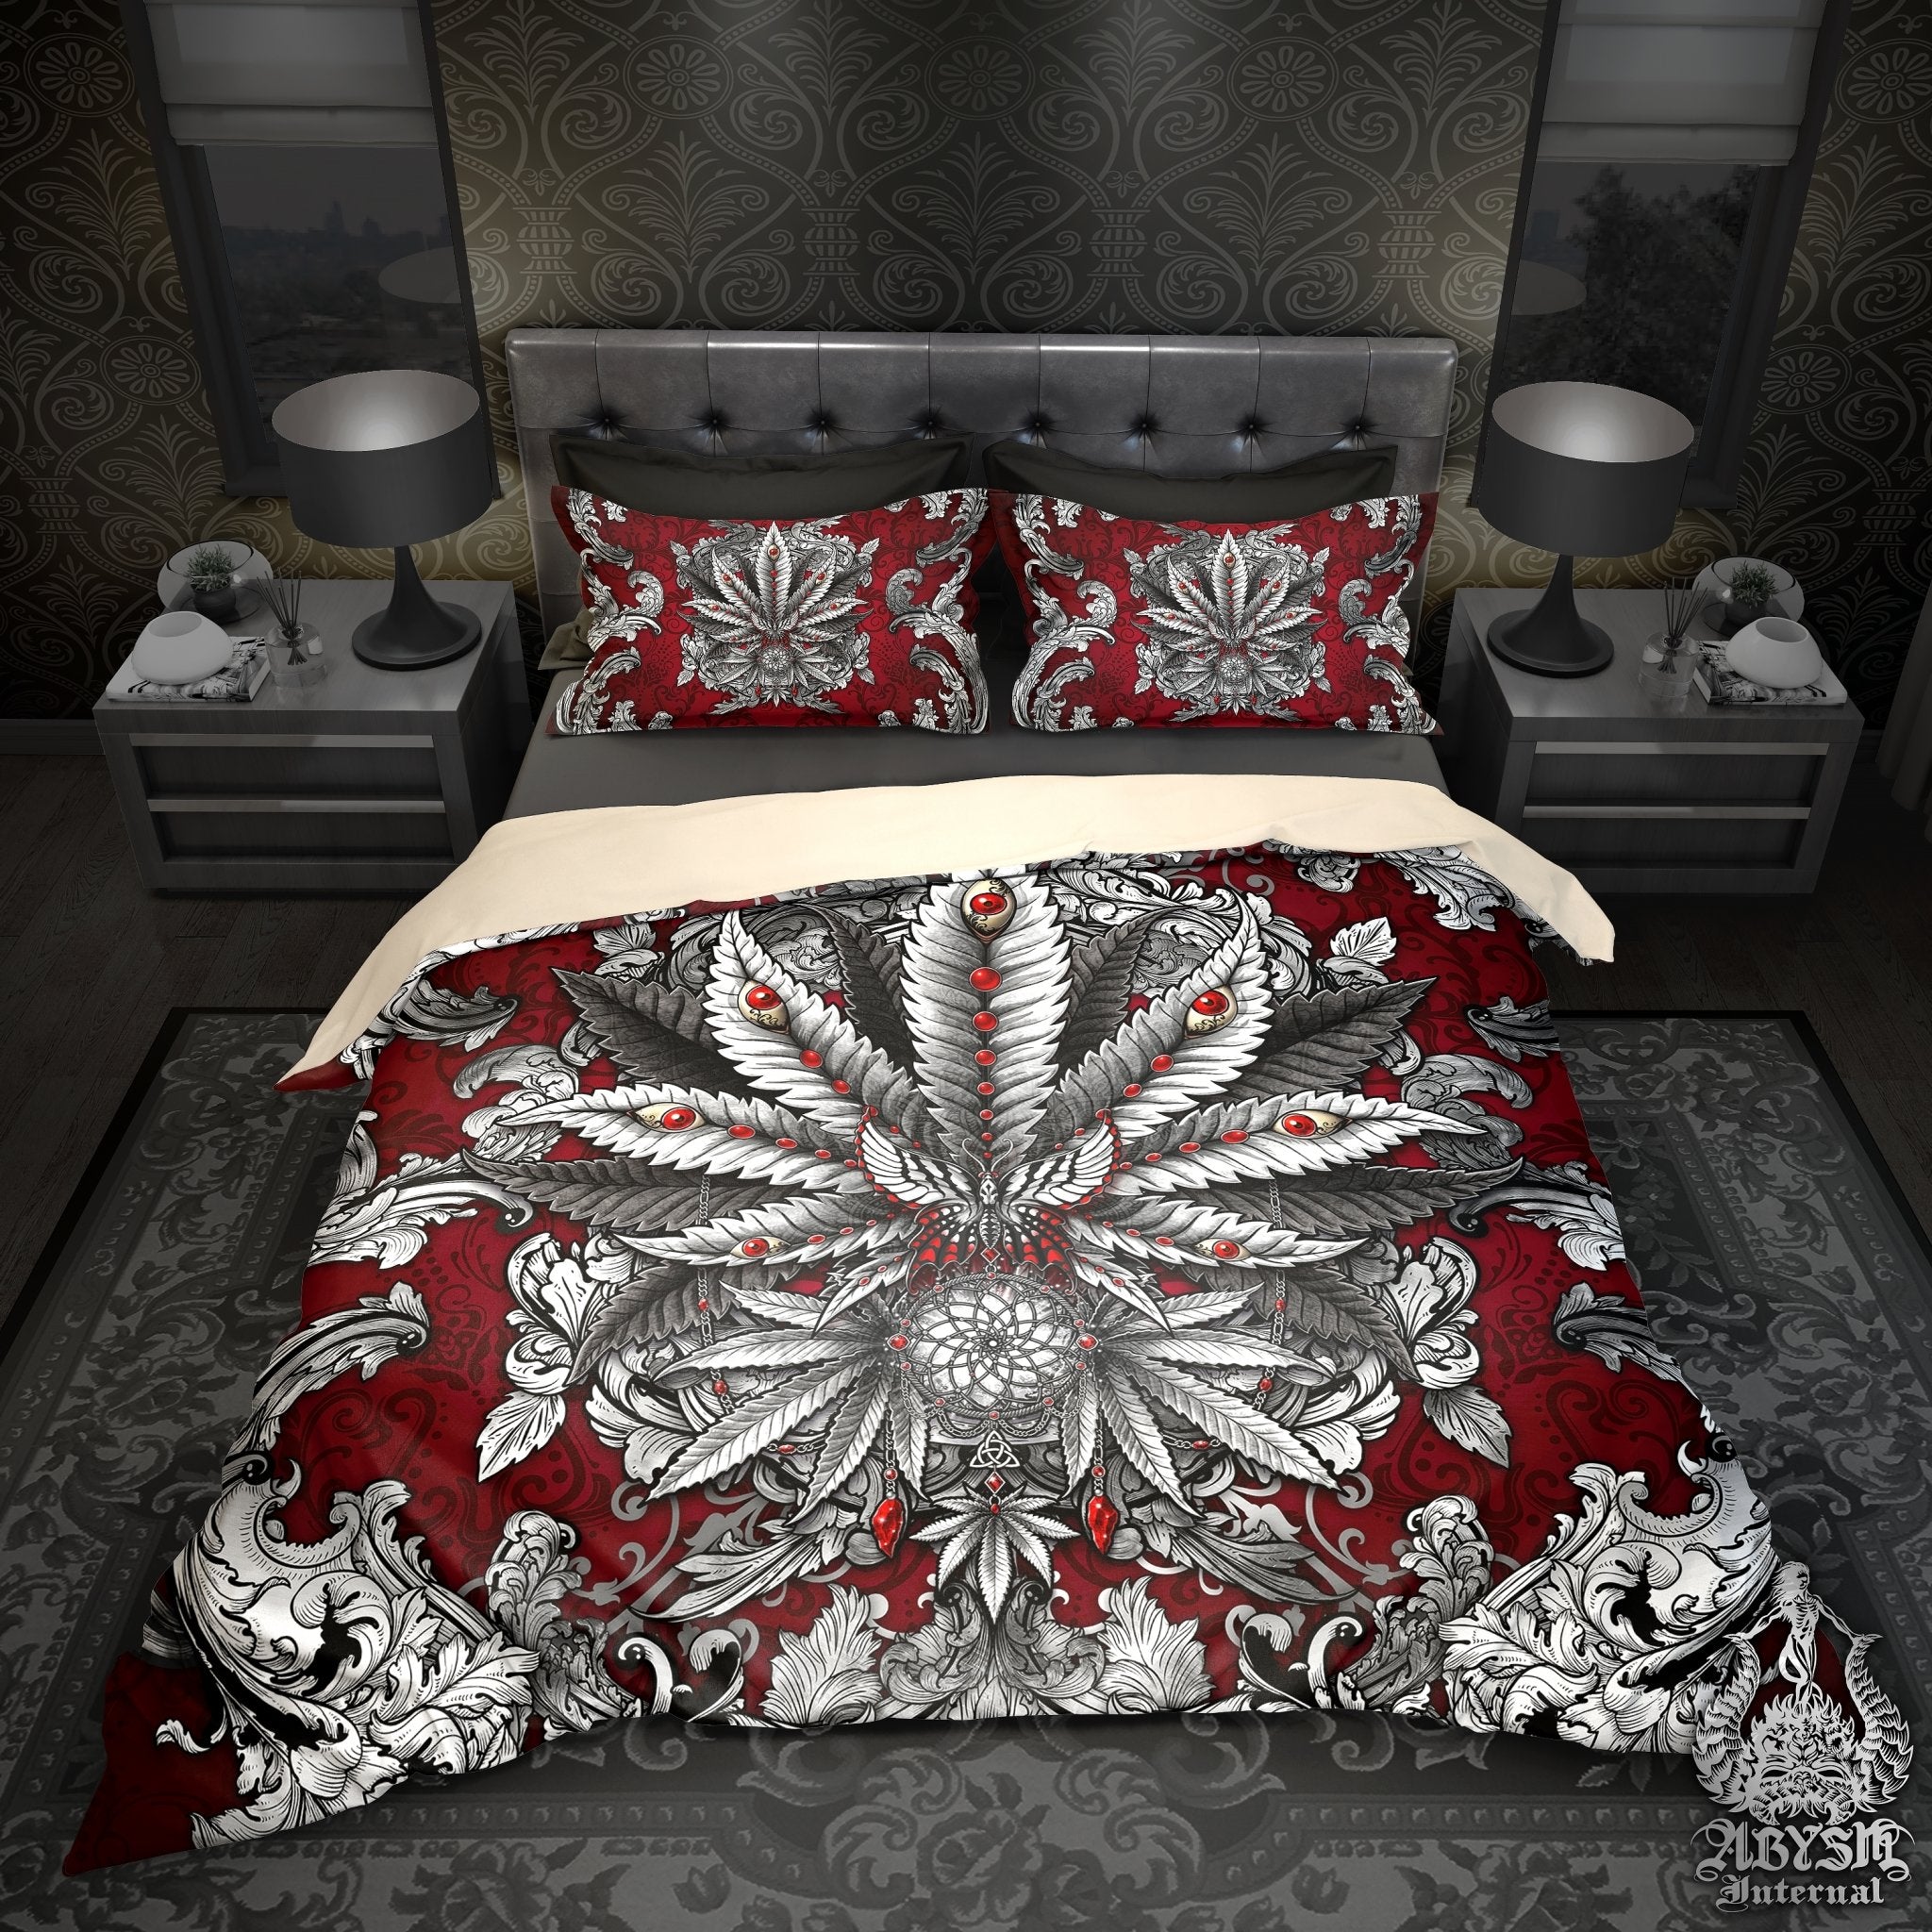 Weed Bedding Set, Comforter and Duvet, Cannabis Bed Cover, Marijuana Bedroom Decor, King, Queen and Twin Size, 420 Room Art - Silver - Abysm Internal